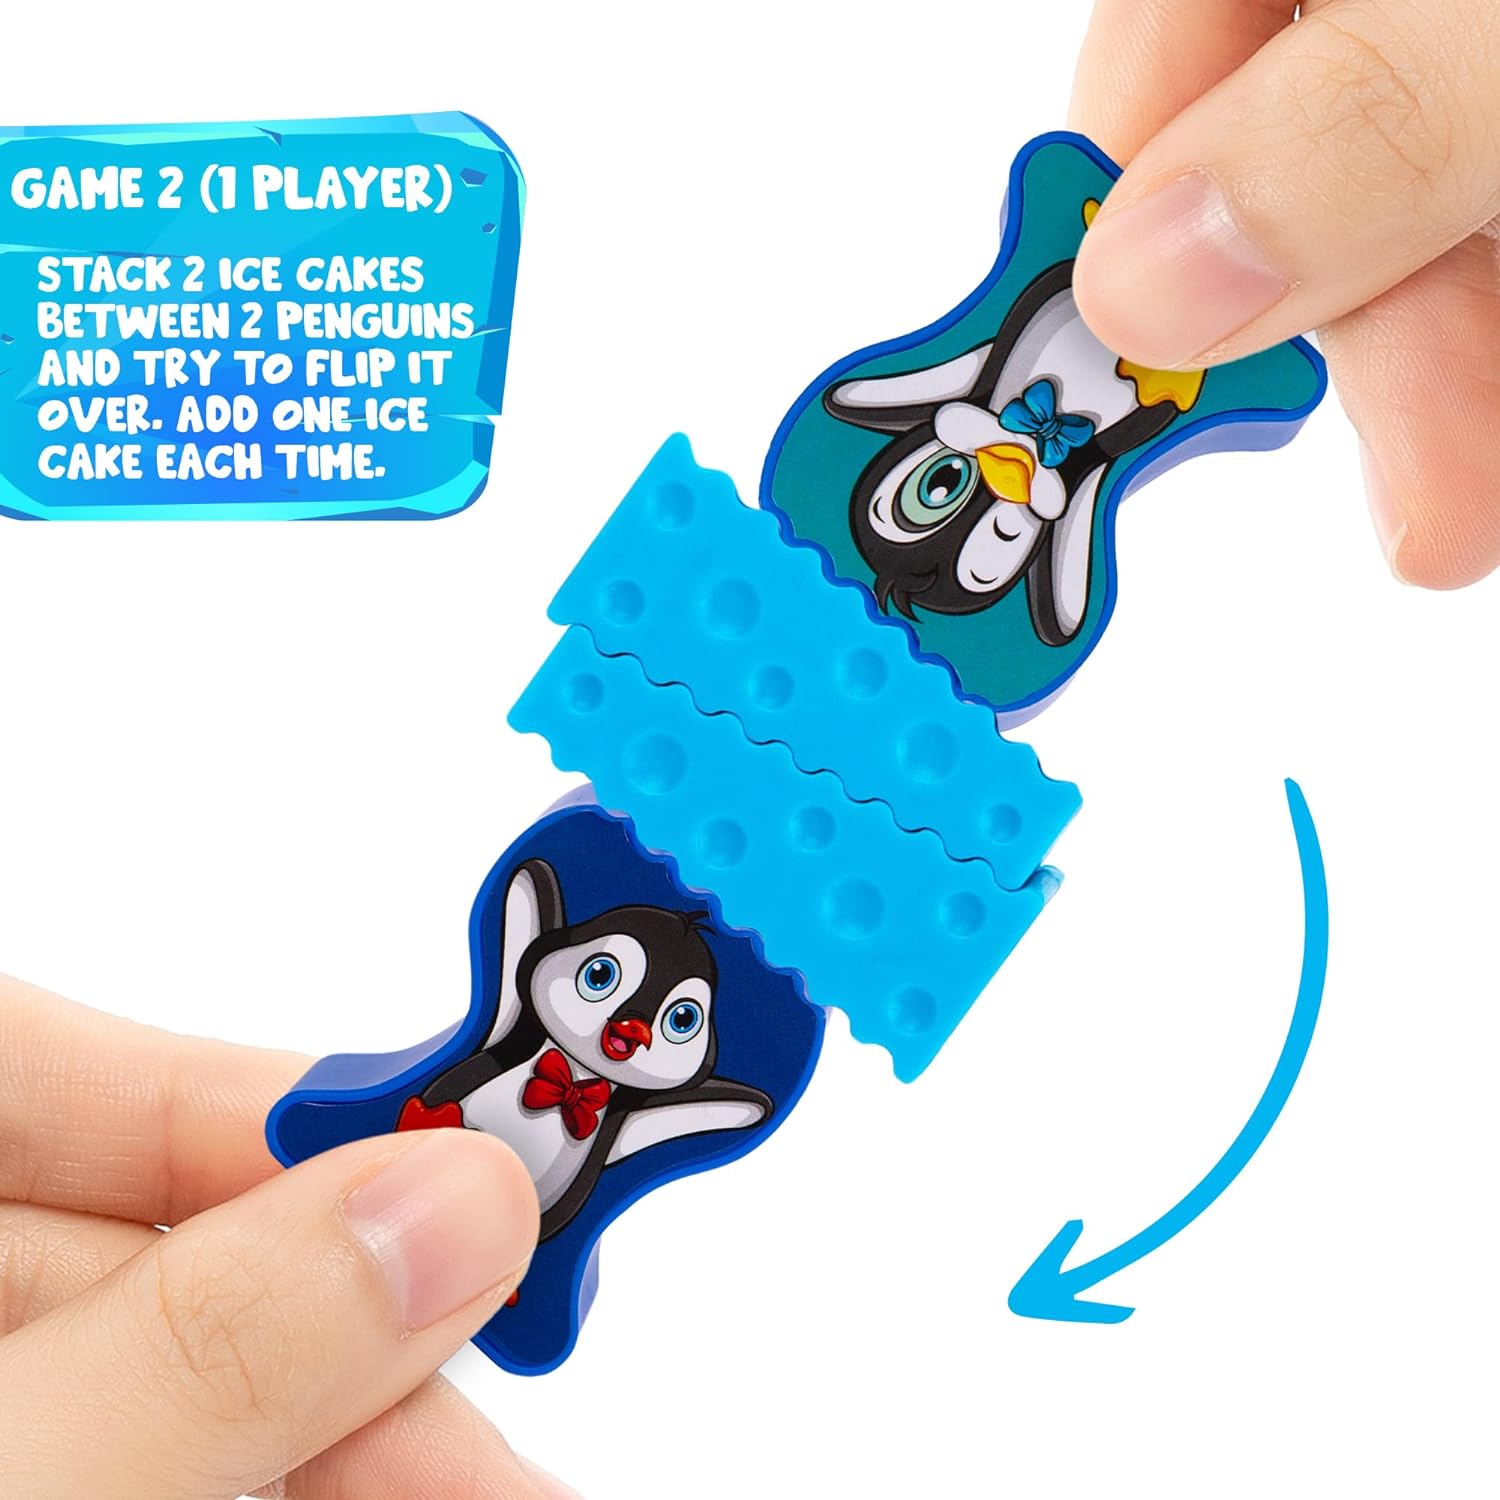 Stacking Penguin Ice Game for Kids - 20 Ice Stacking Toy Pieces, 2 Penguins, and Sticker Sheet - 3 Unique Challenges